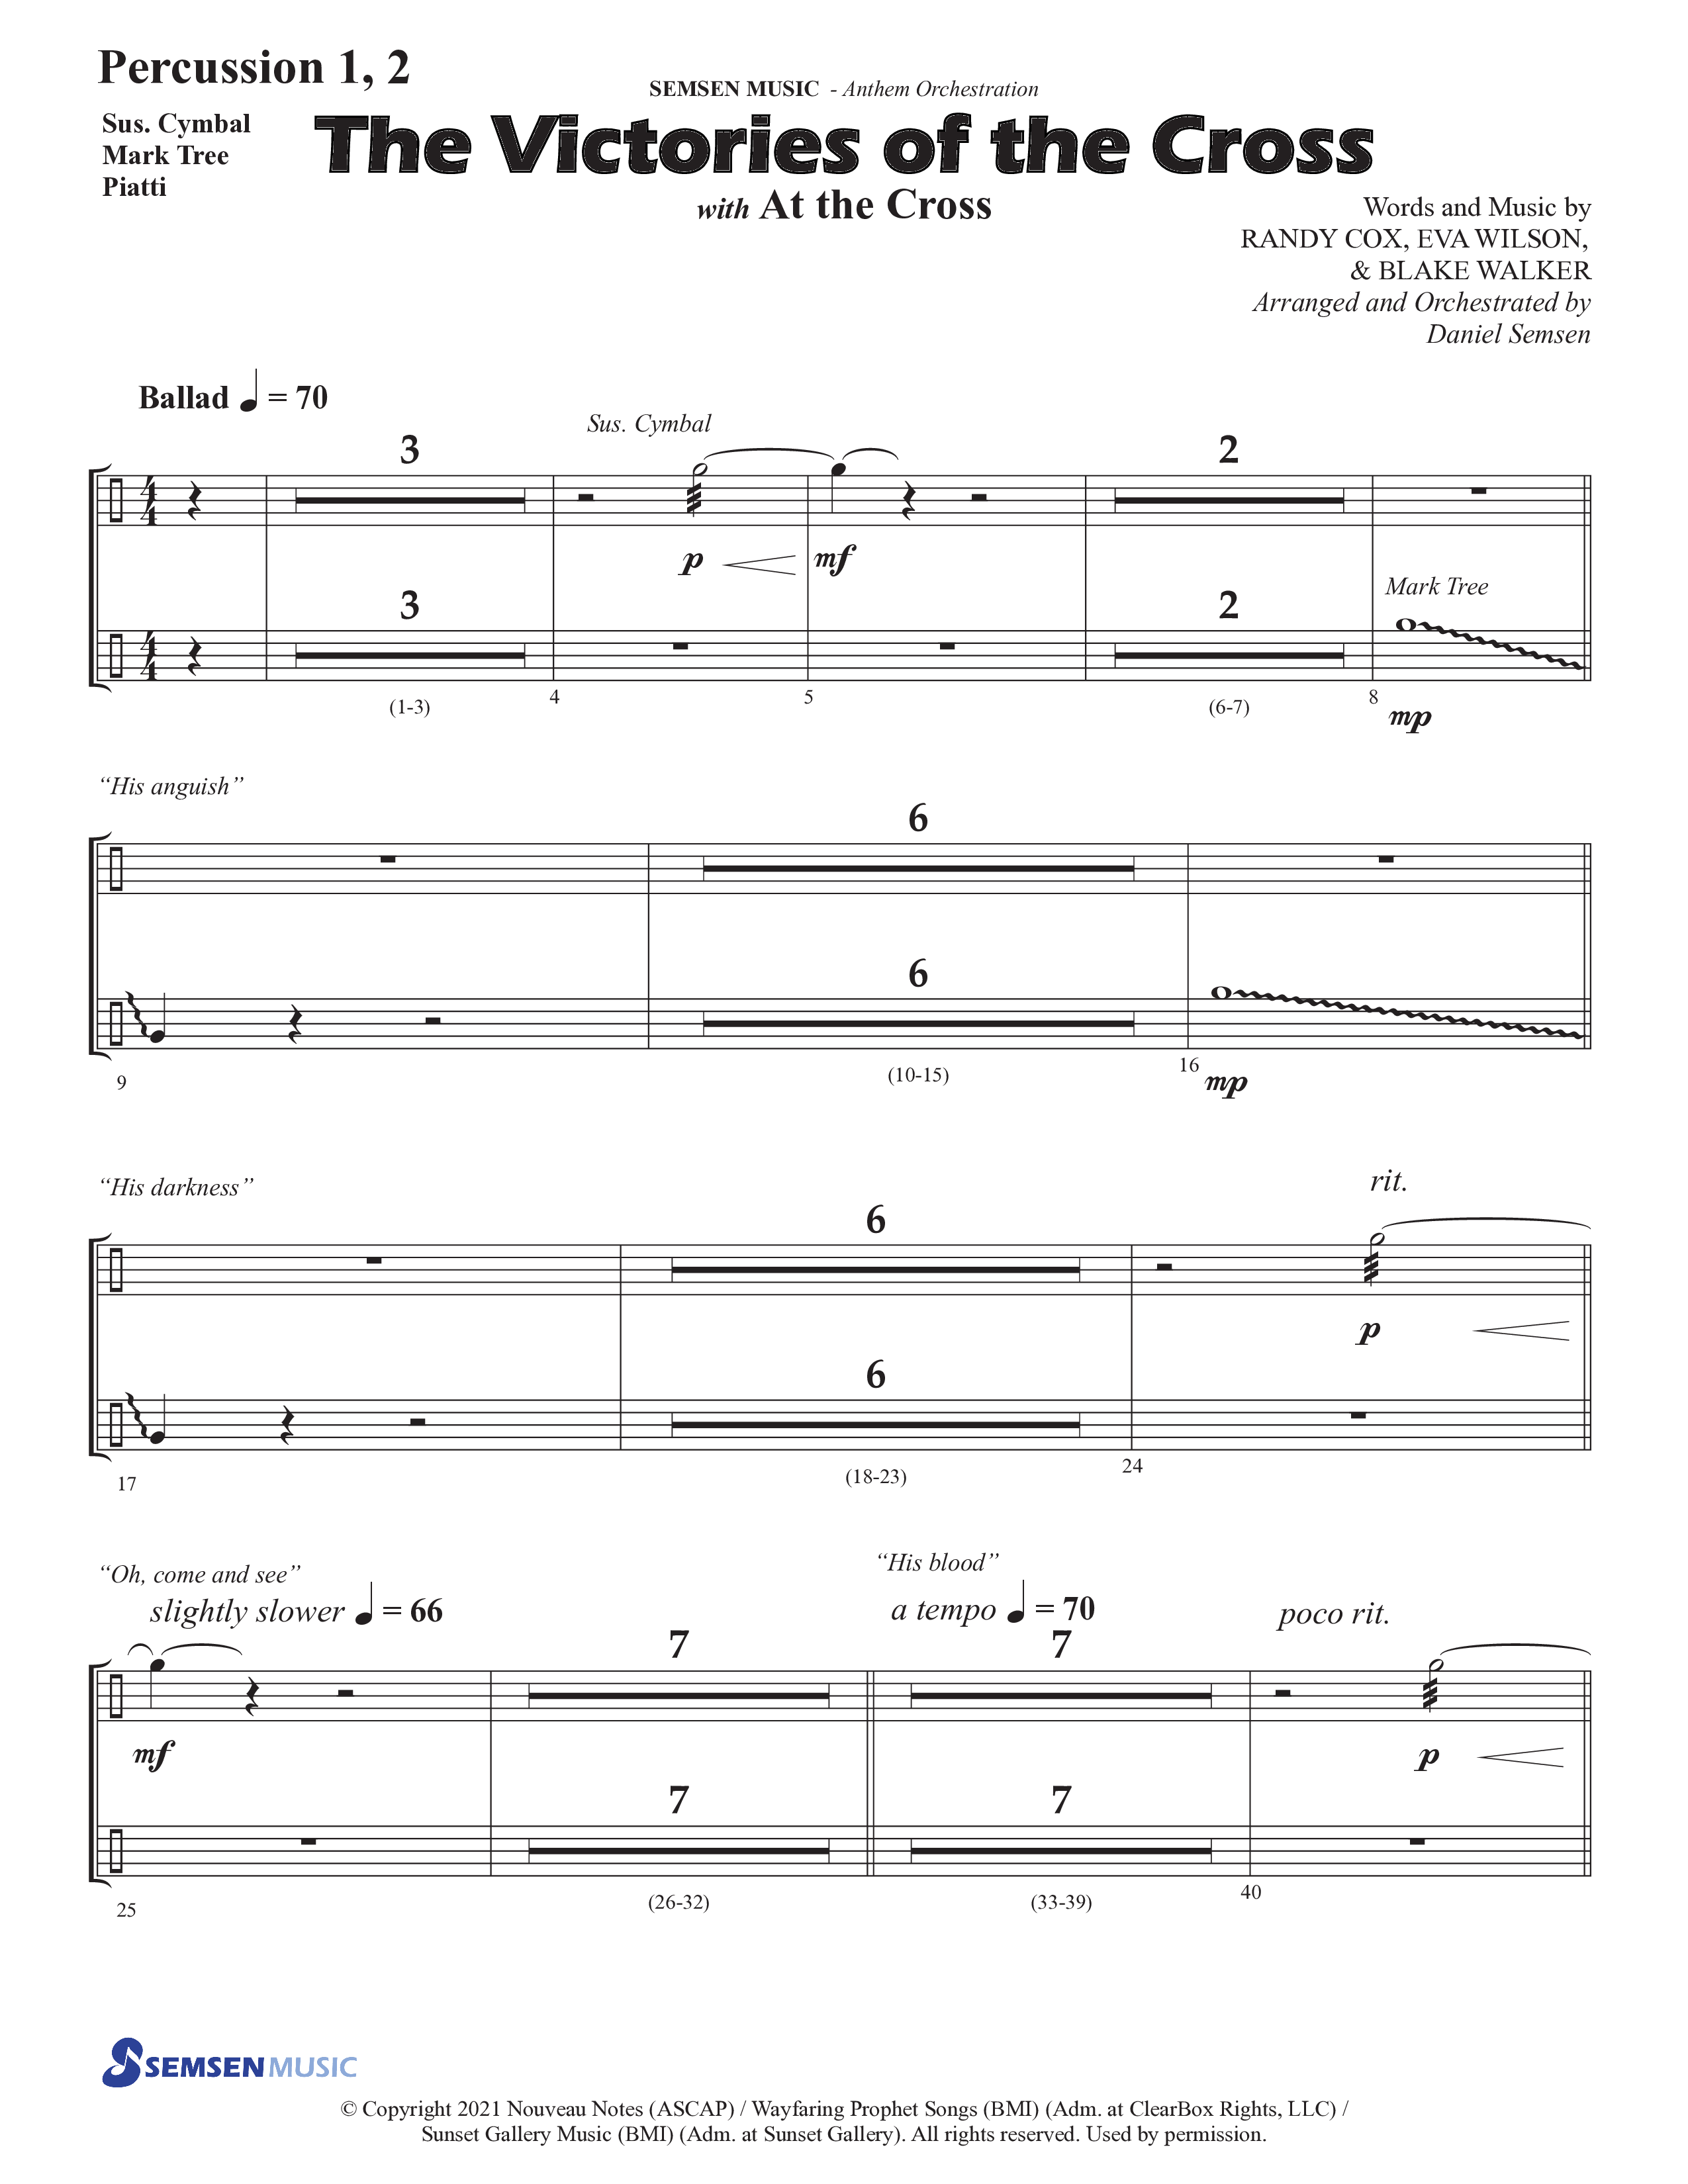 The Victories Of The Cross (with At The Cross) (Choral Anthem SATB) Percussion 1/2 (Semsen Music / Arr. Daniel Semsen)